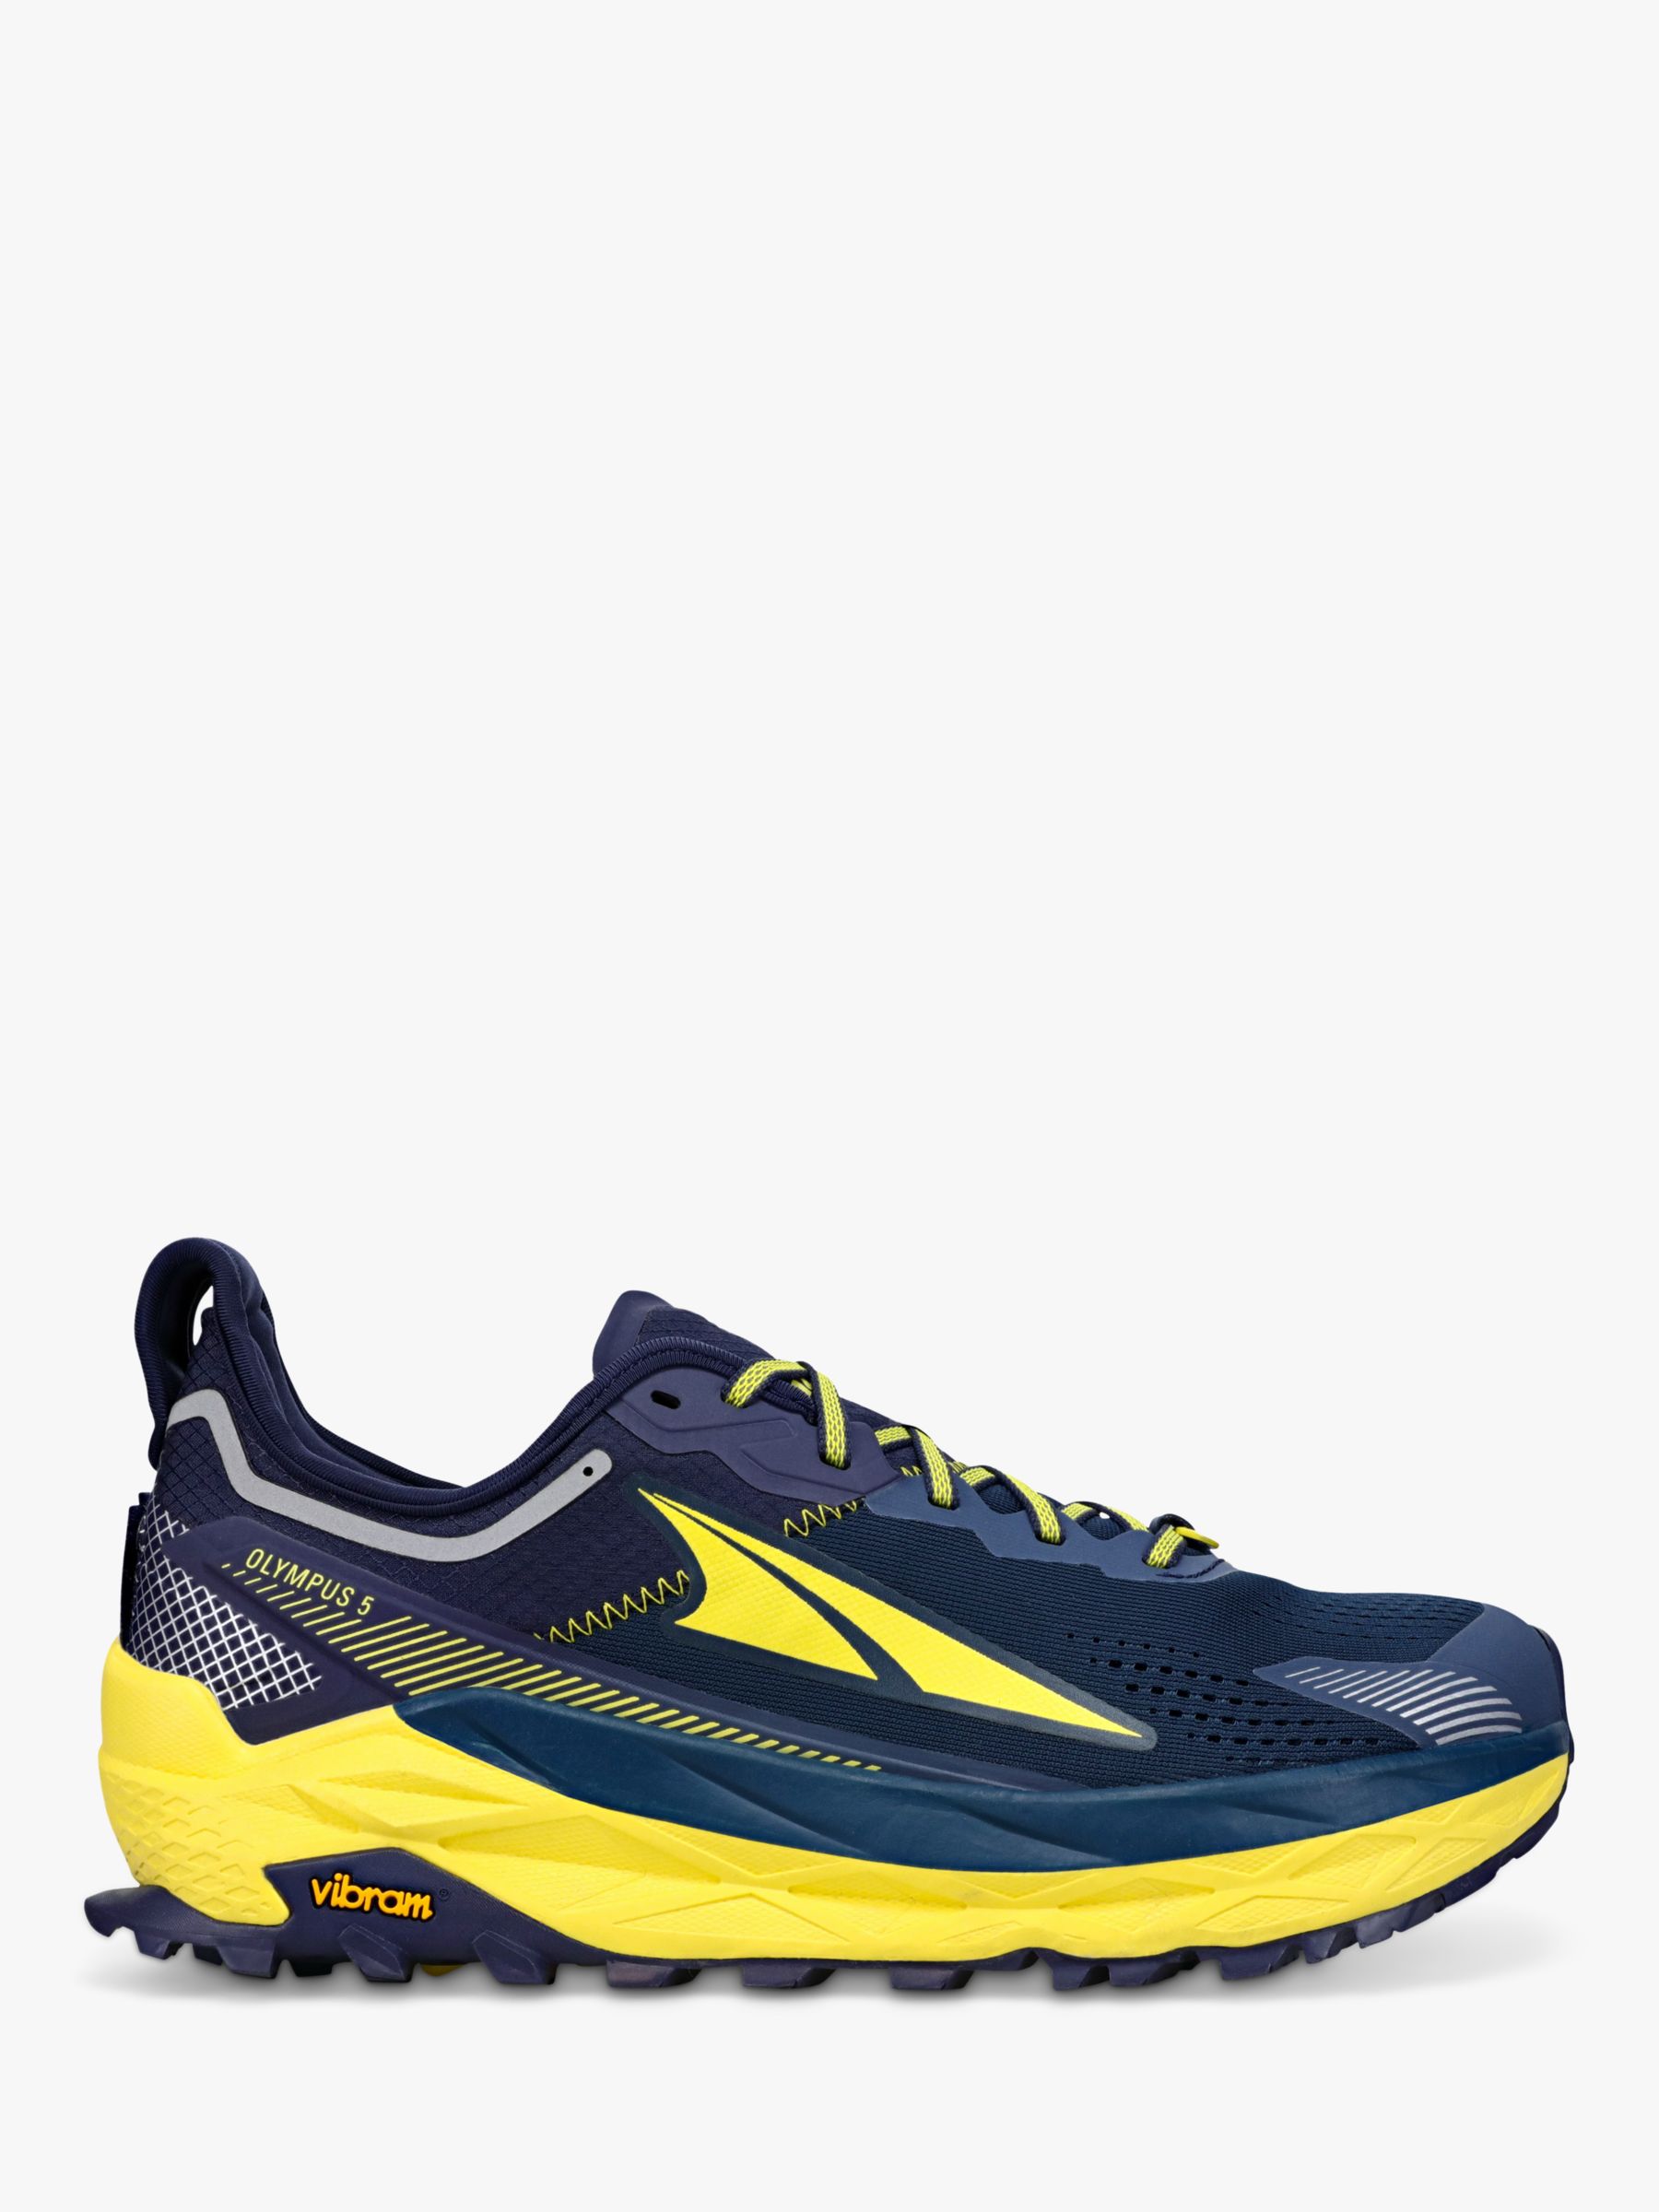 Altra Olympus 5 Men's Trail Running Shoes, Navy, 10.5